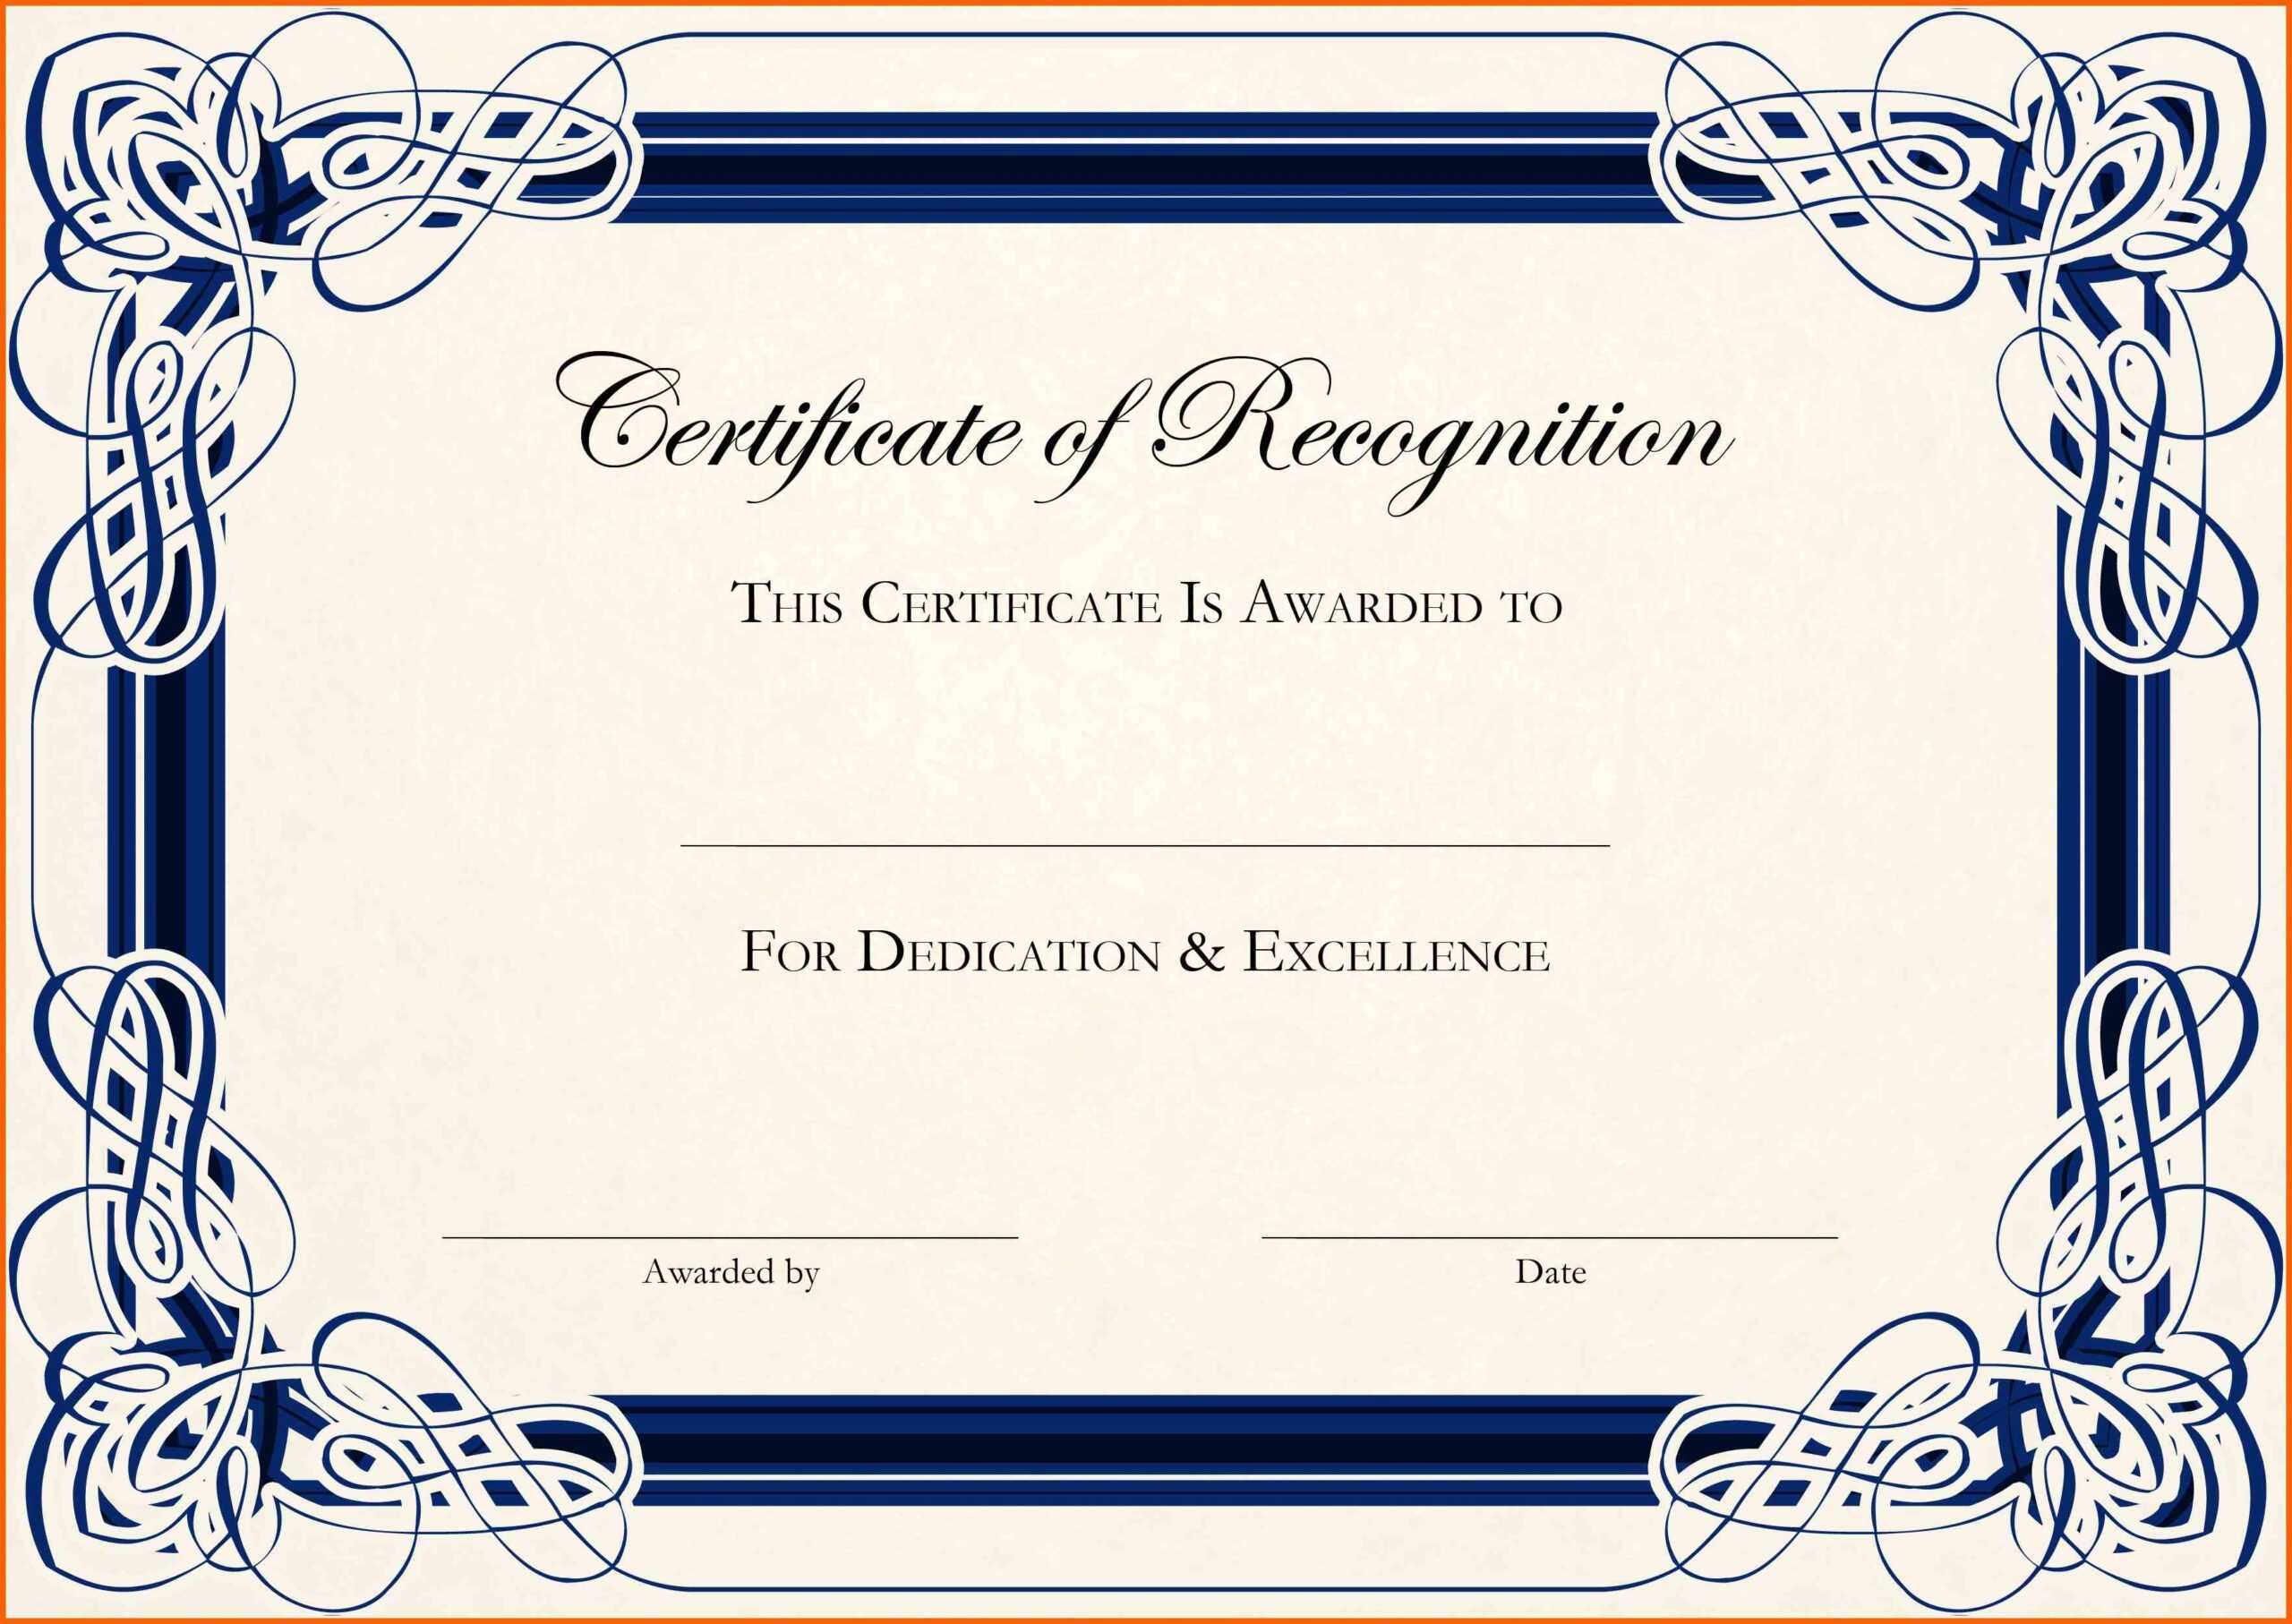 11+ Free Downloads Certificate Templates In Word | Ml Datos Regarding Certificate Templates For Word Free Downloads